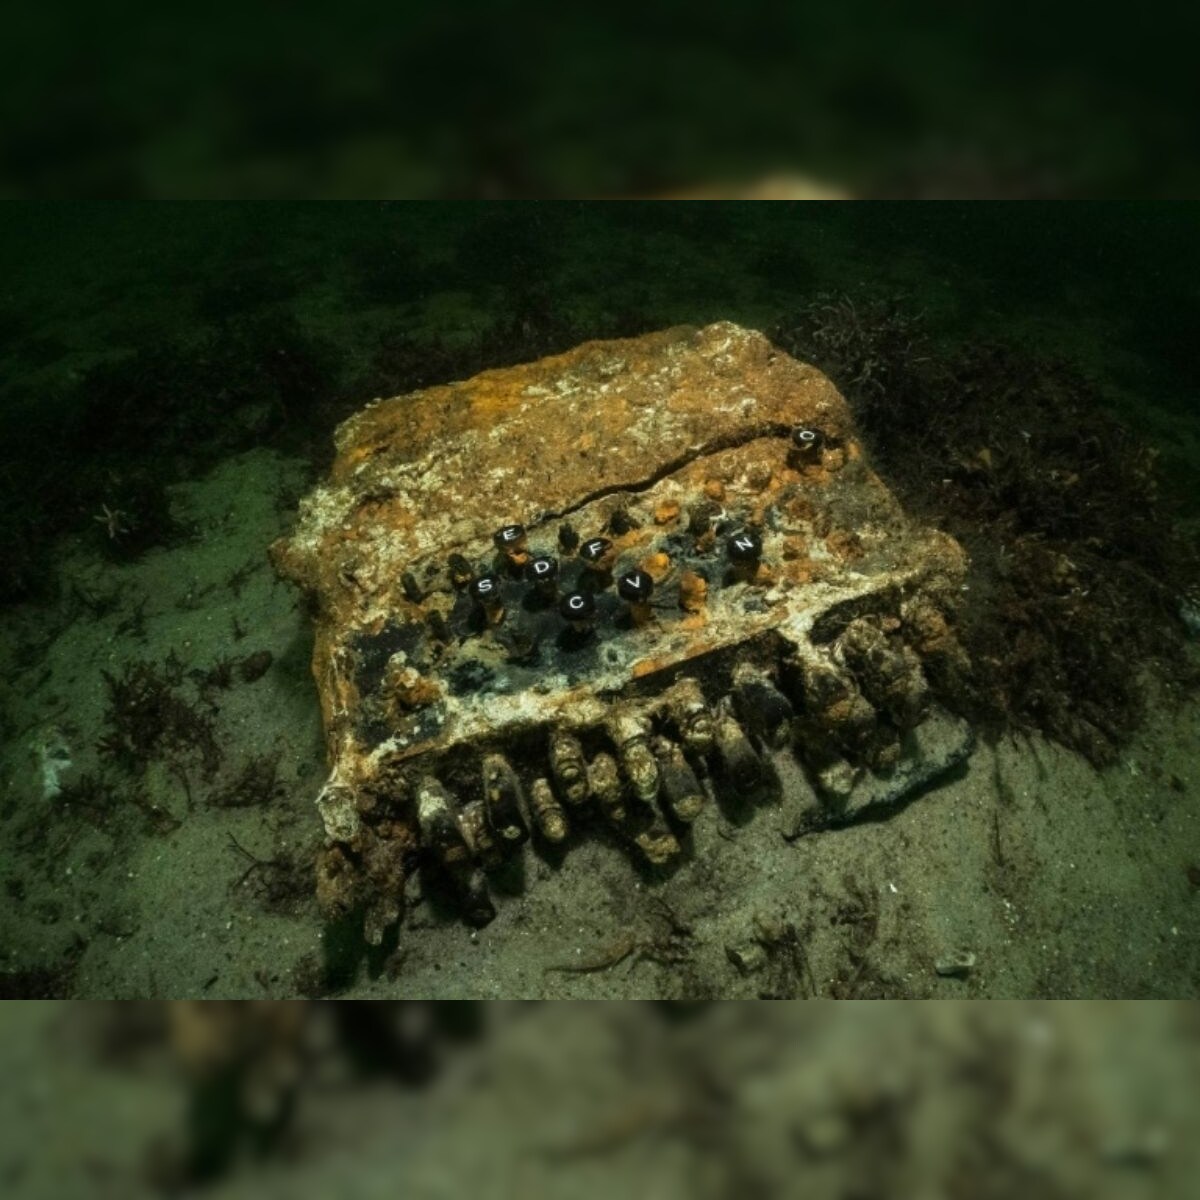 German Divers Find Enigma Code Machine Used By Nazi Leaders During World War Ii In Baltic Sea